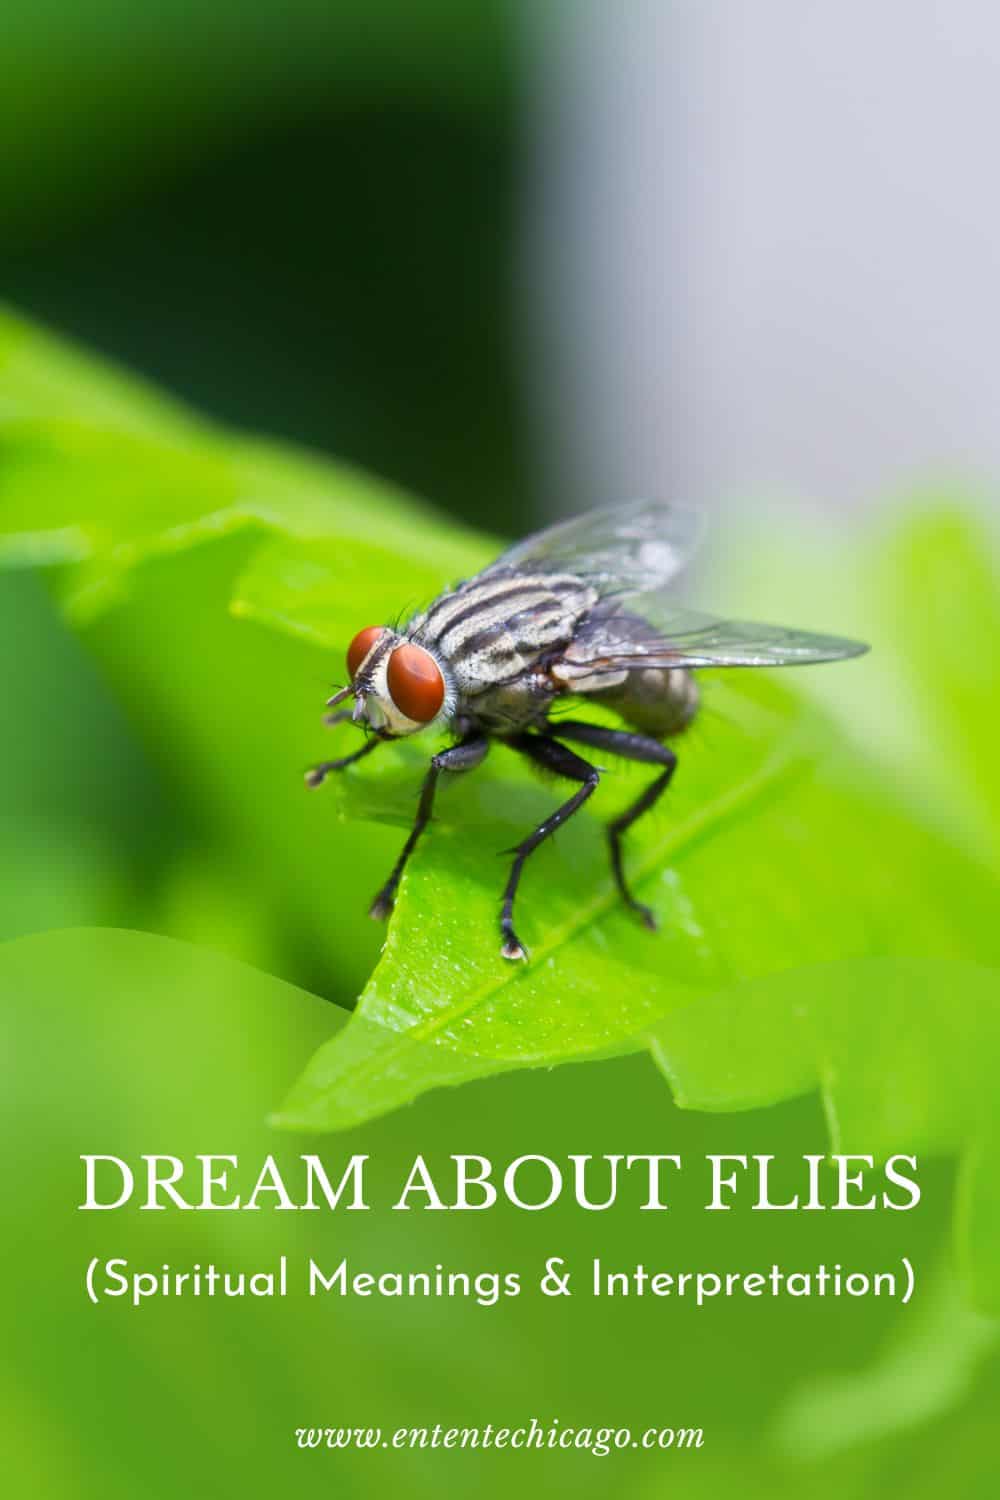 What does it mean to dream about flies